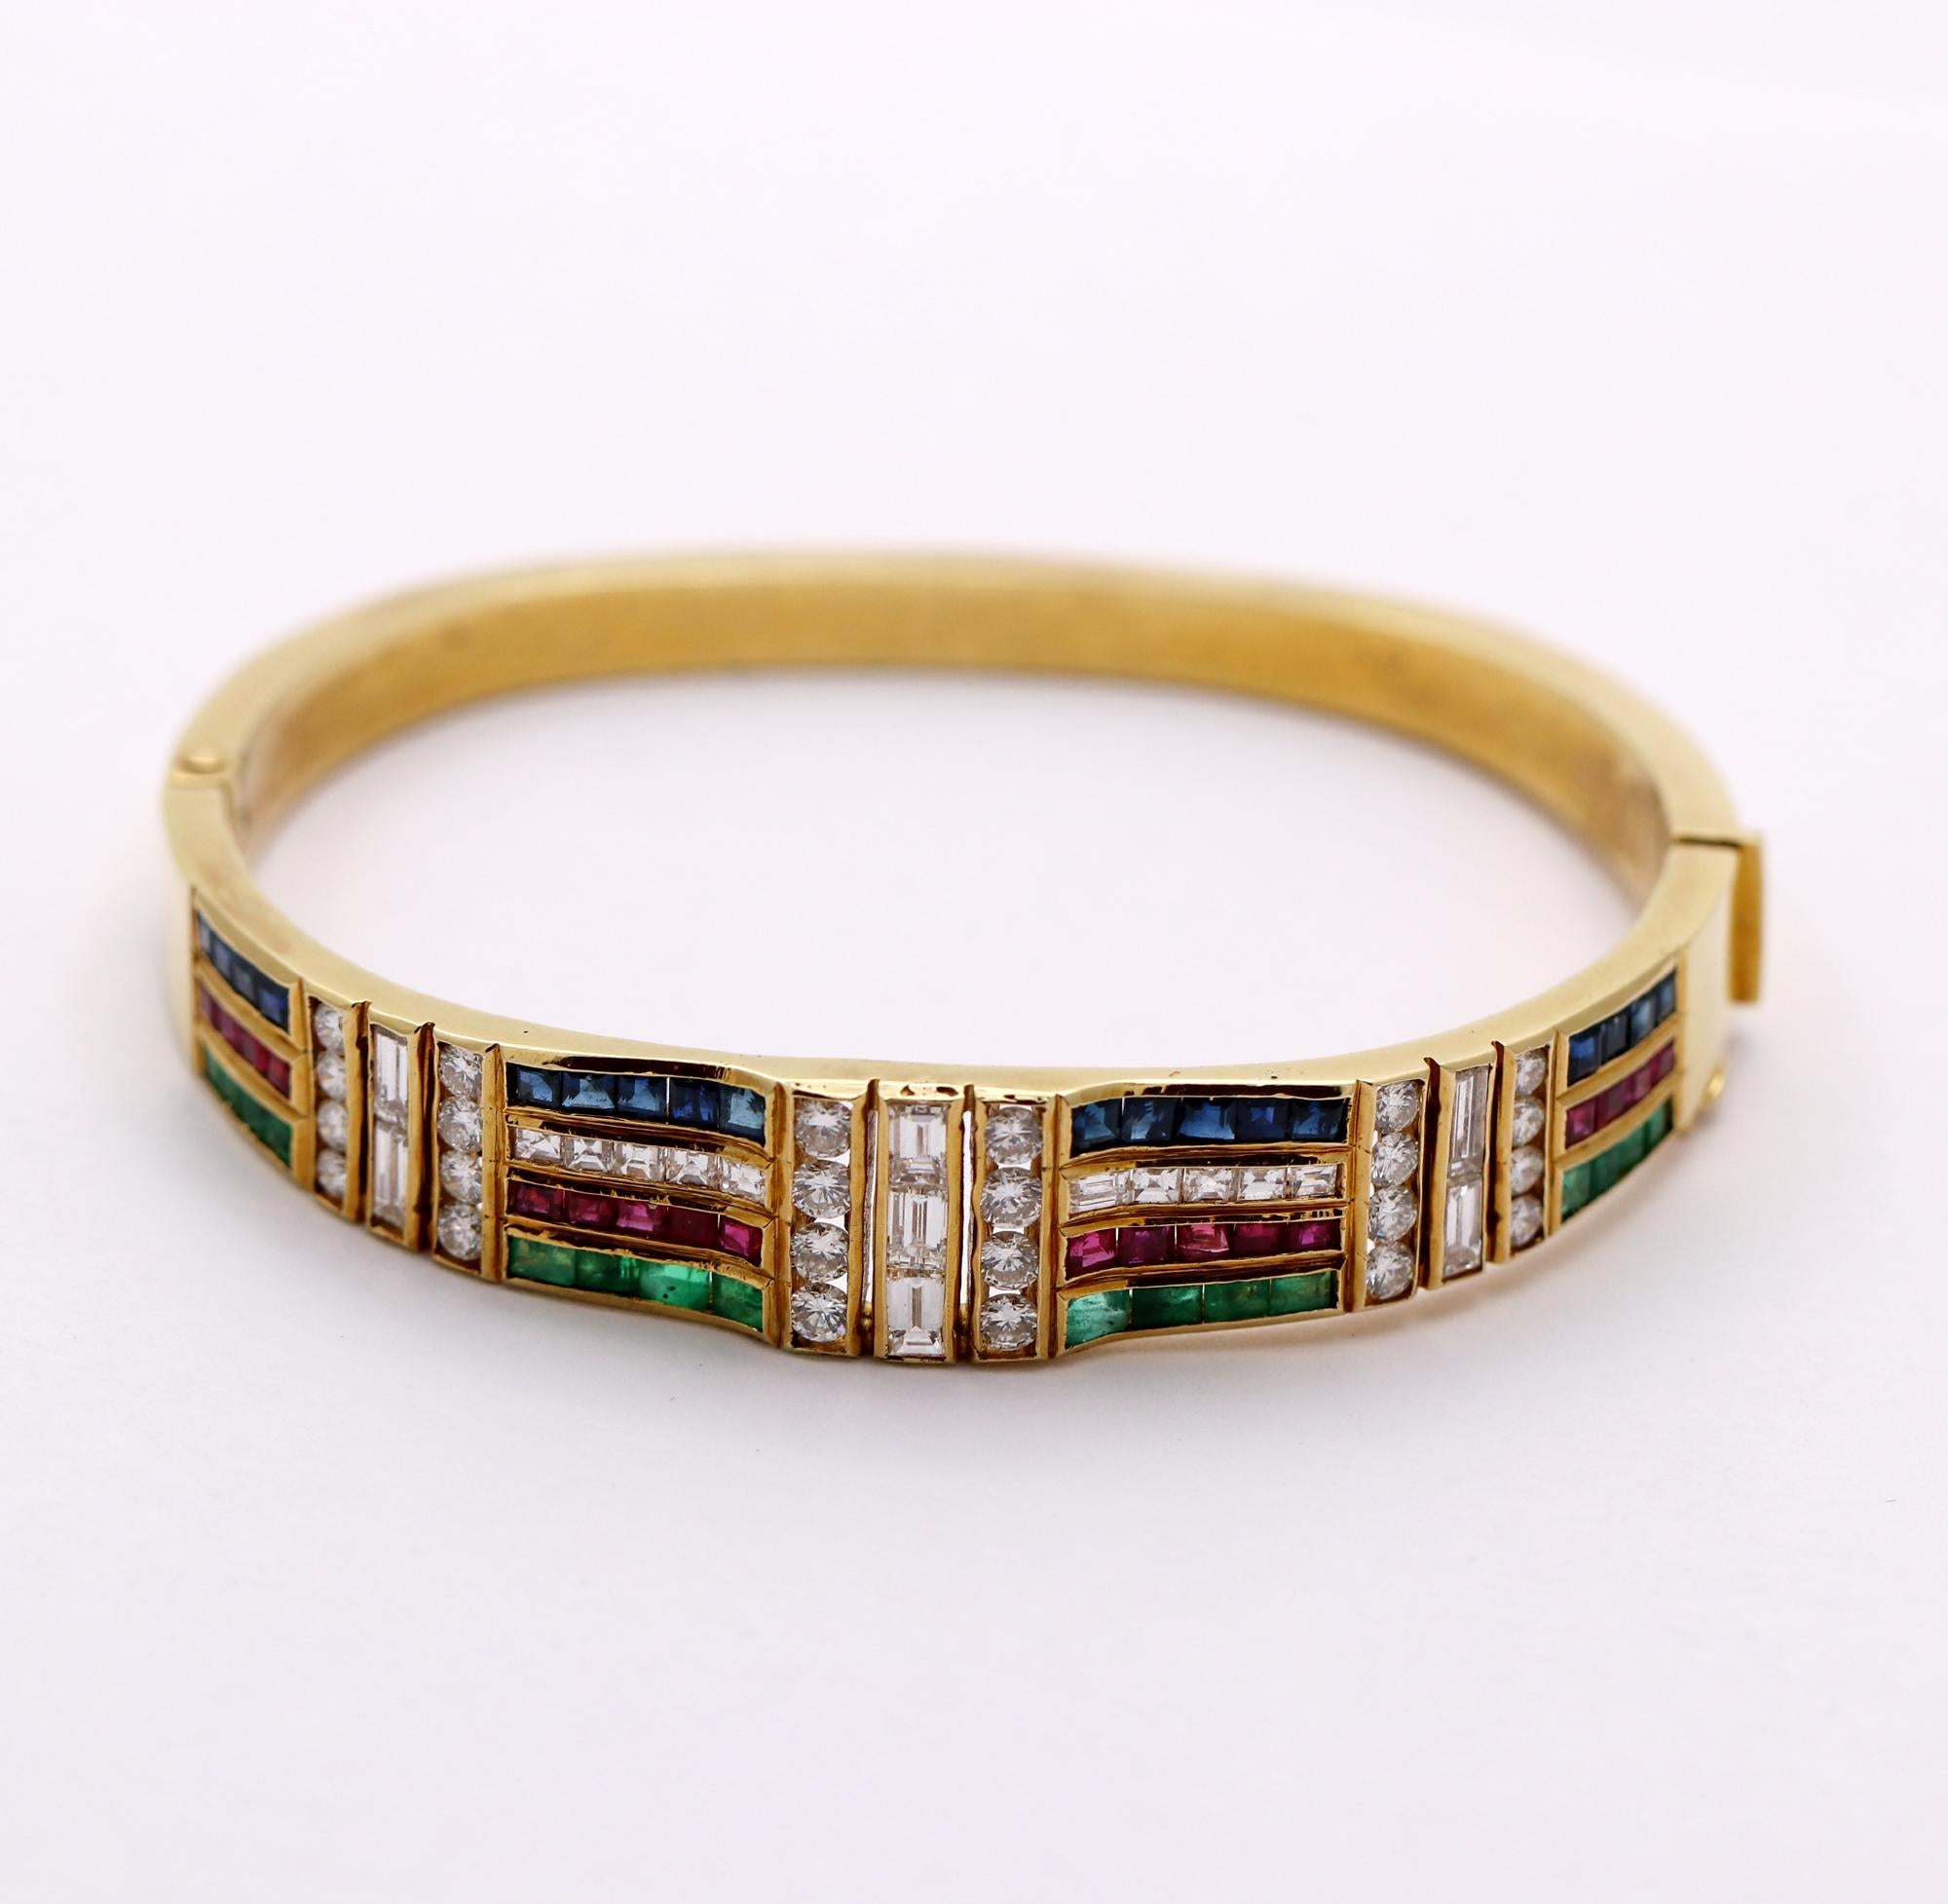 Women's Bangle Bracelet with a Rainbow of Colored Stones and Diamonds